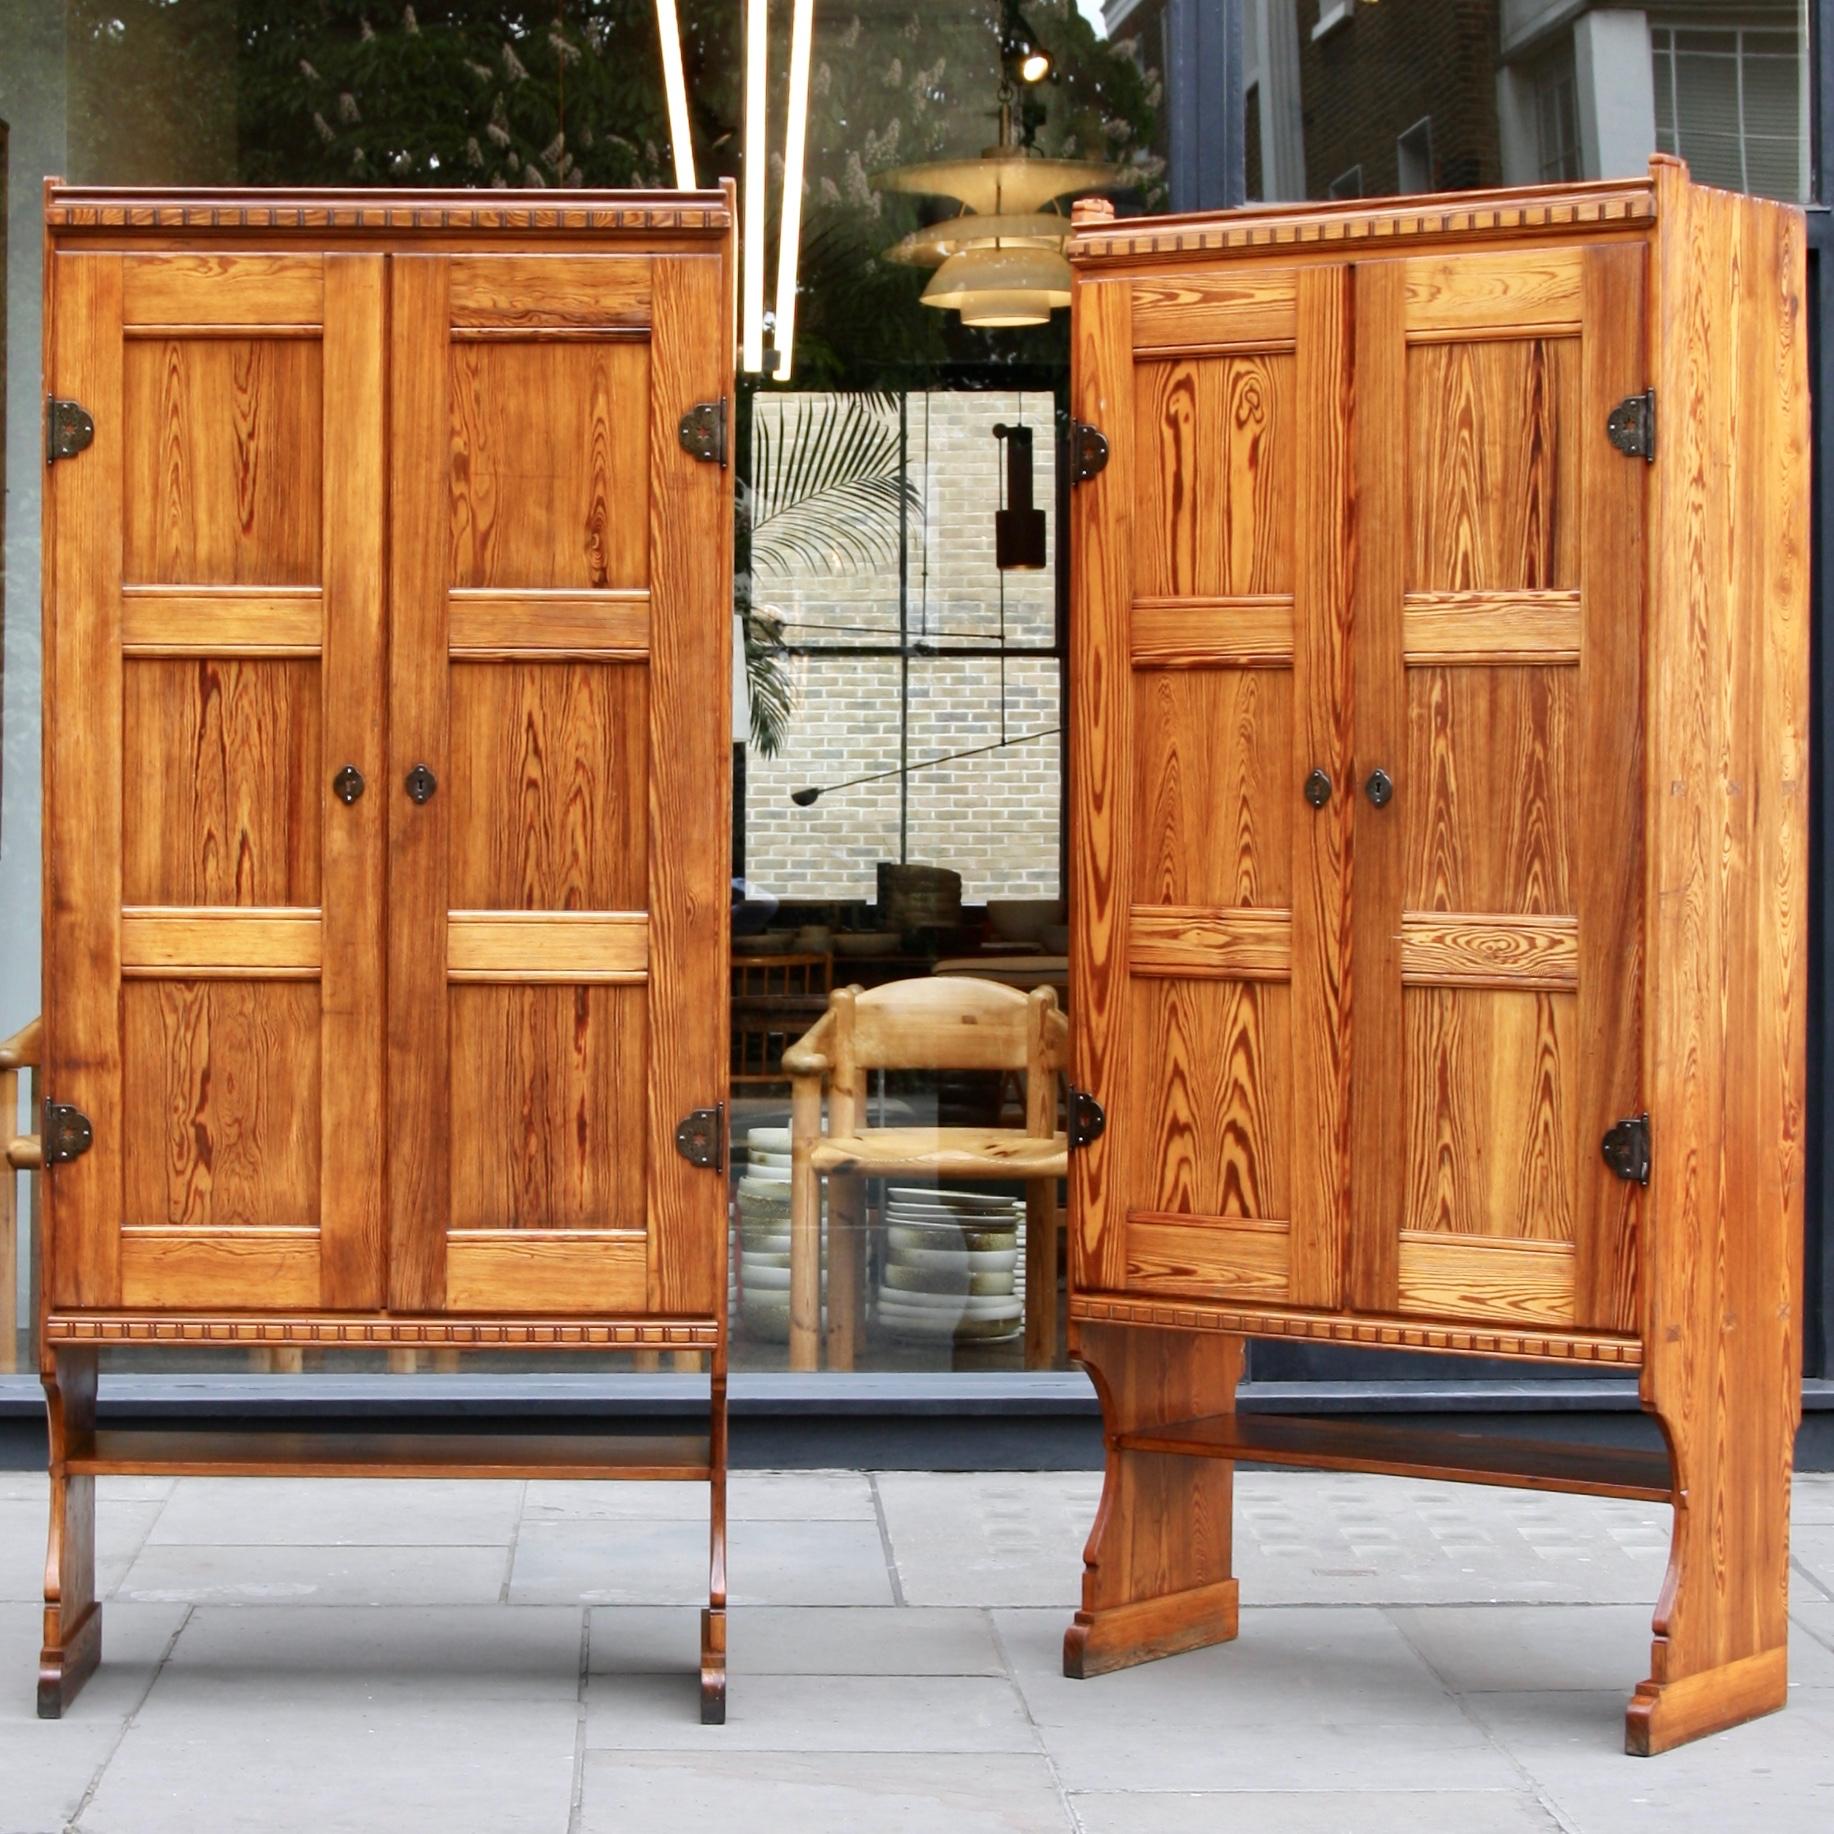 A pair of free-standing cabinets designed by architect Martin Nyrop and made by Rudolph Rasmussen circa 1900.
The cupboards until recently were part of Copenhagen City Hall, the Danish Art Nouveau* National Romantic style building they were